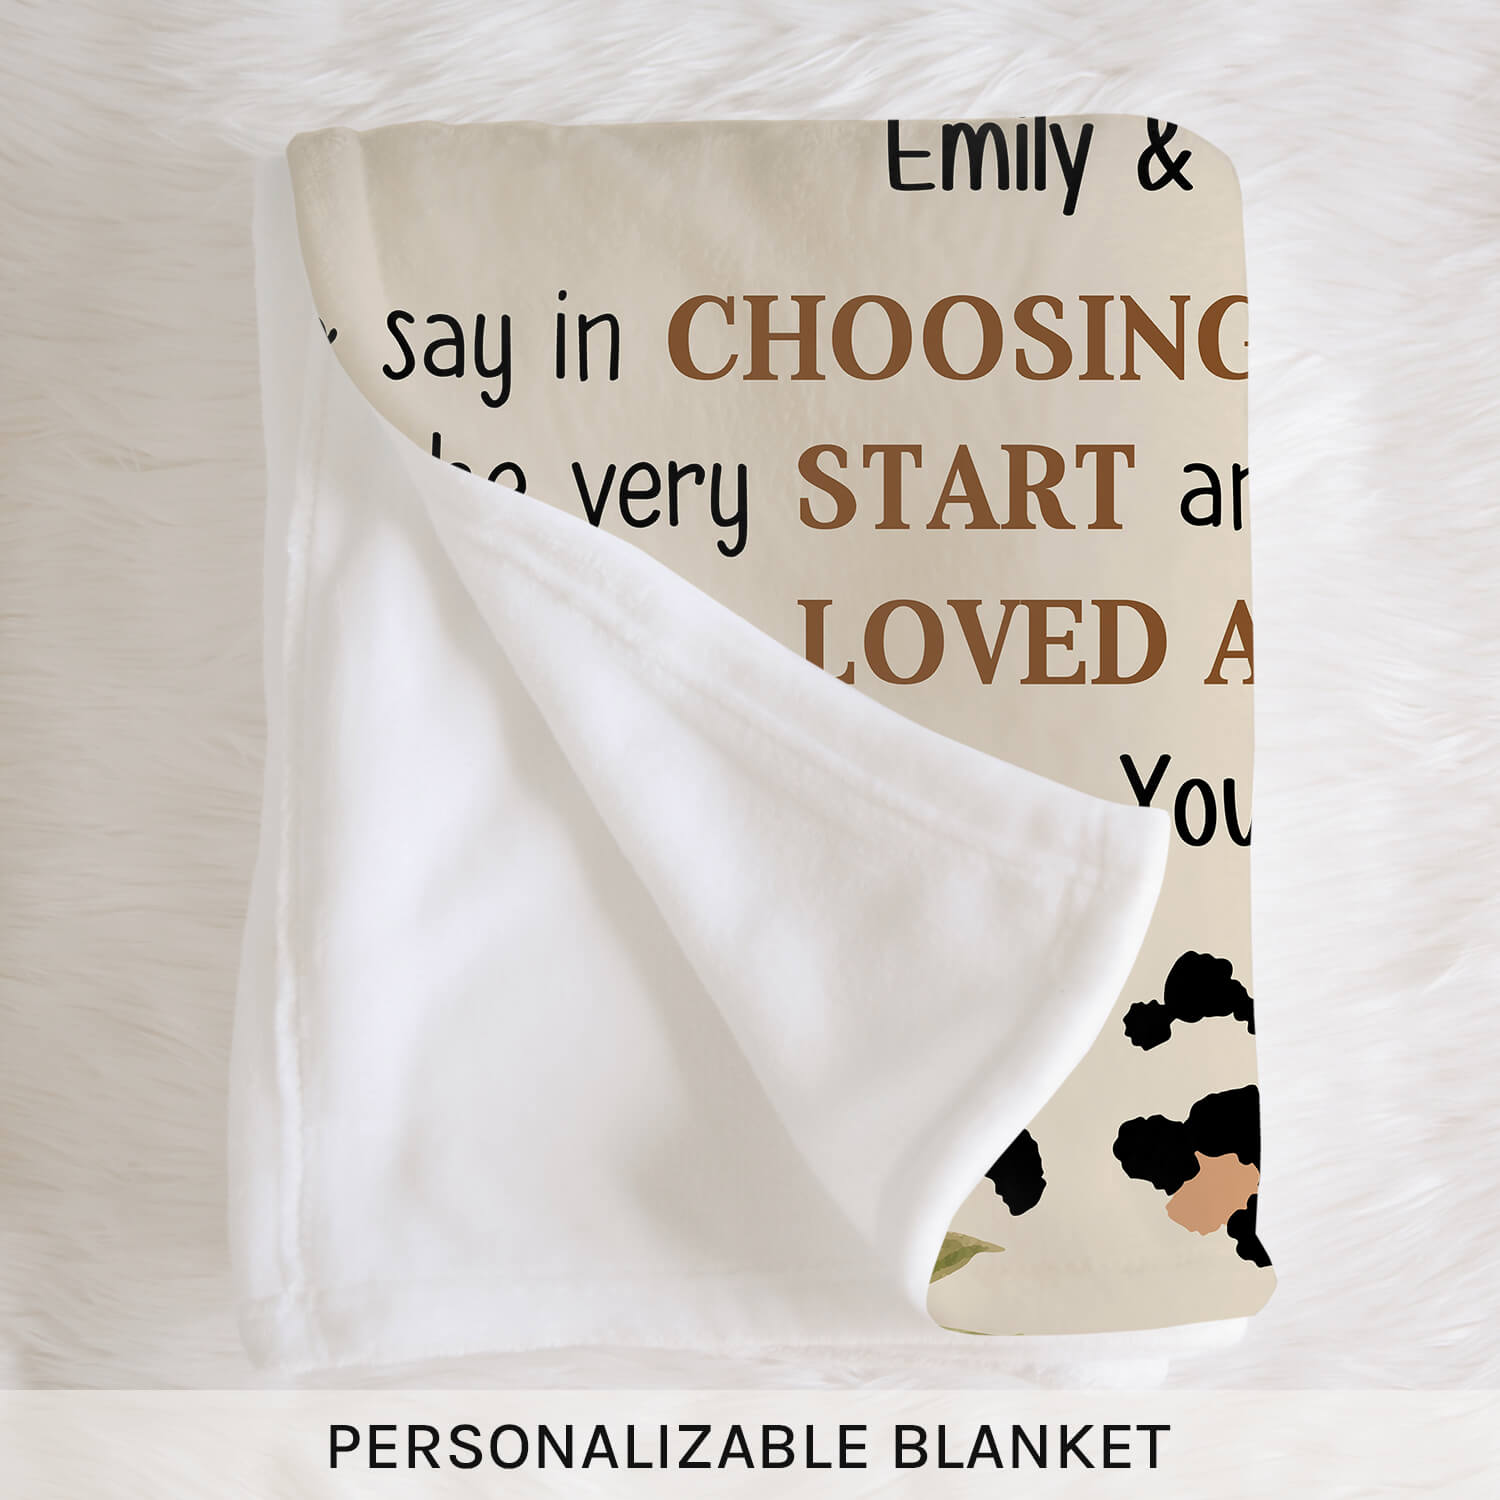 To My Special Aunt - Personalized  gift For Aunt - Custom Blanket - MyMindfulGifts